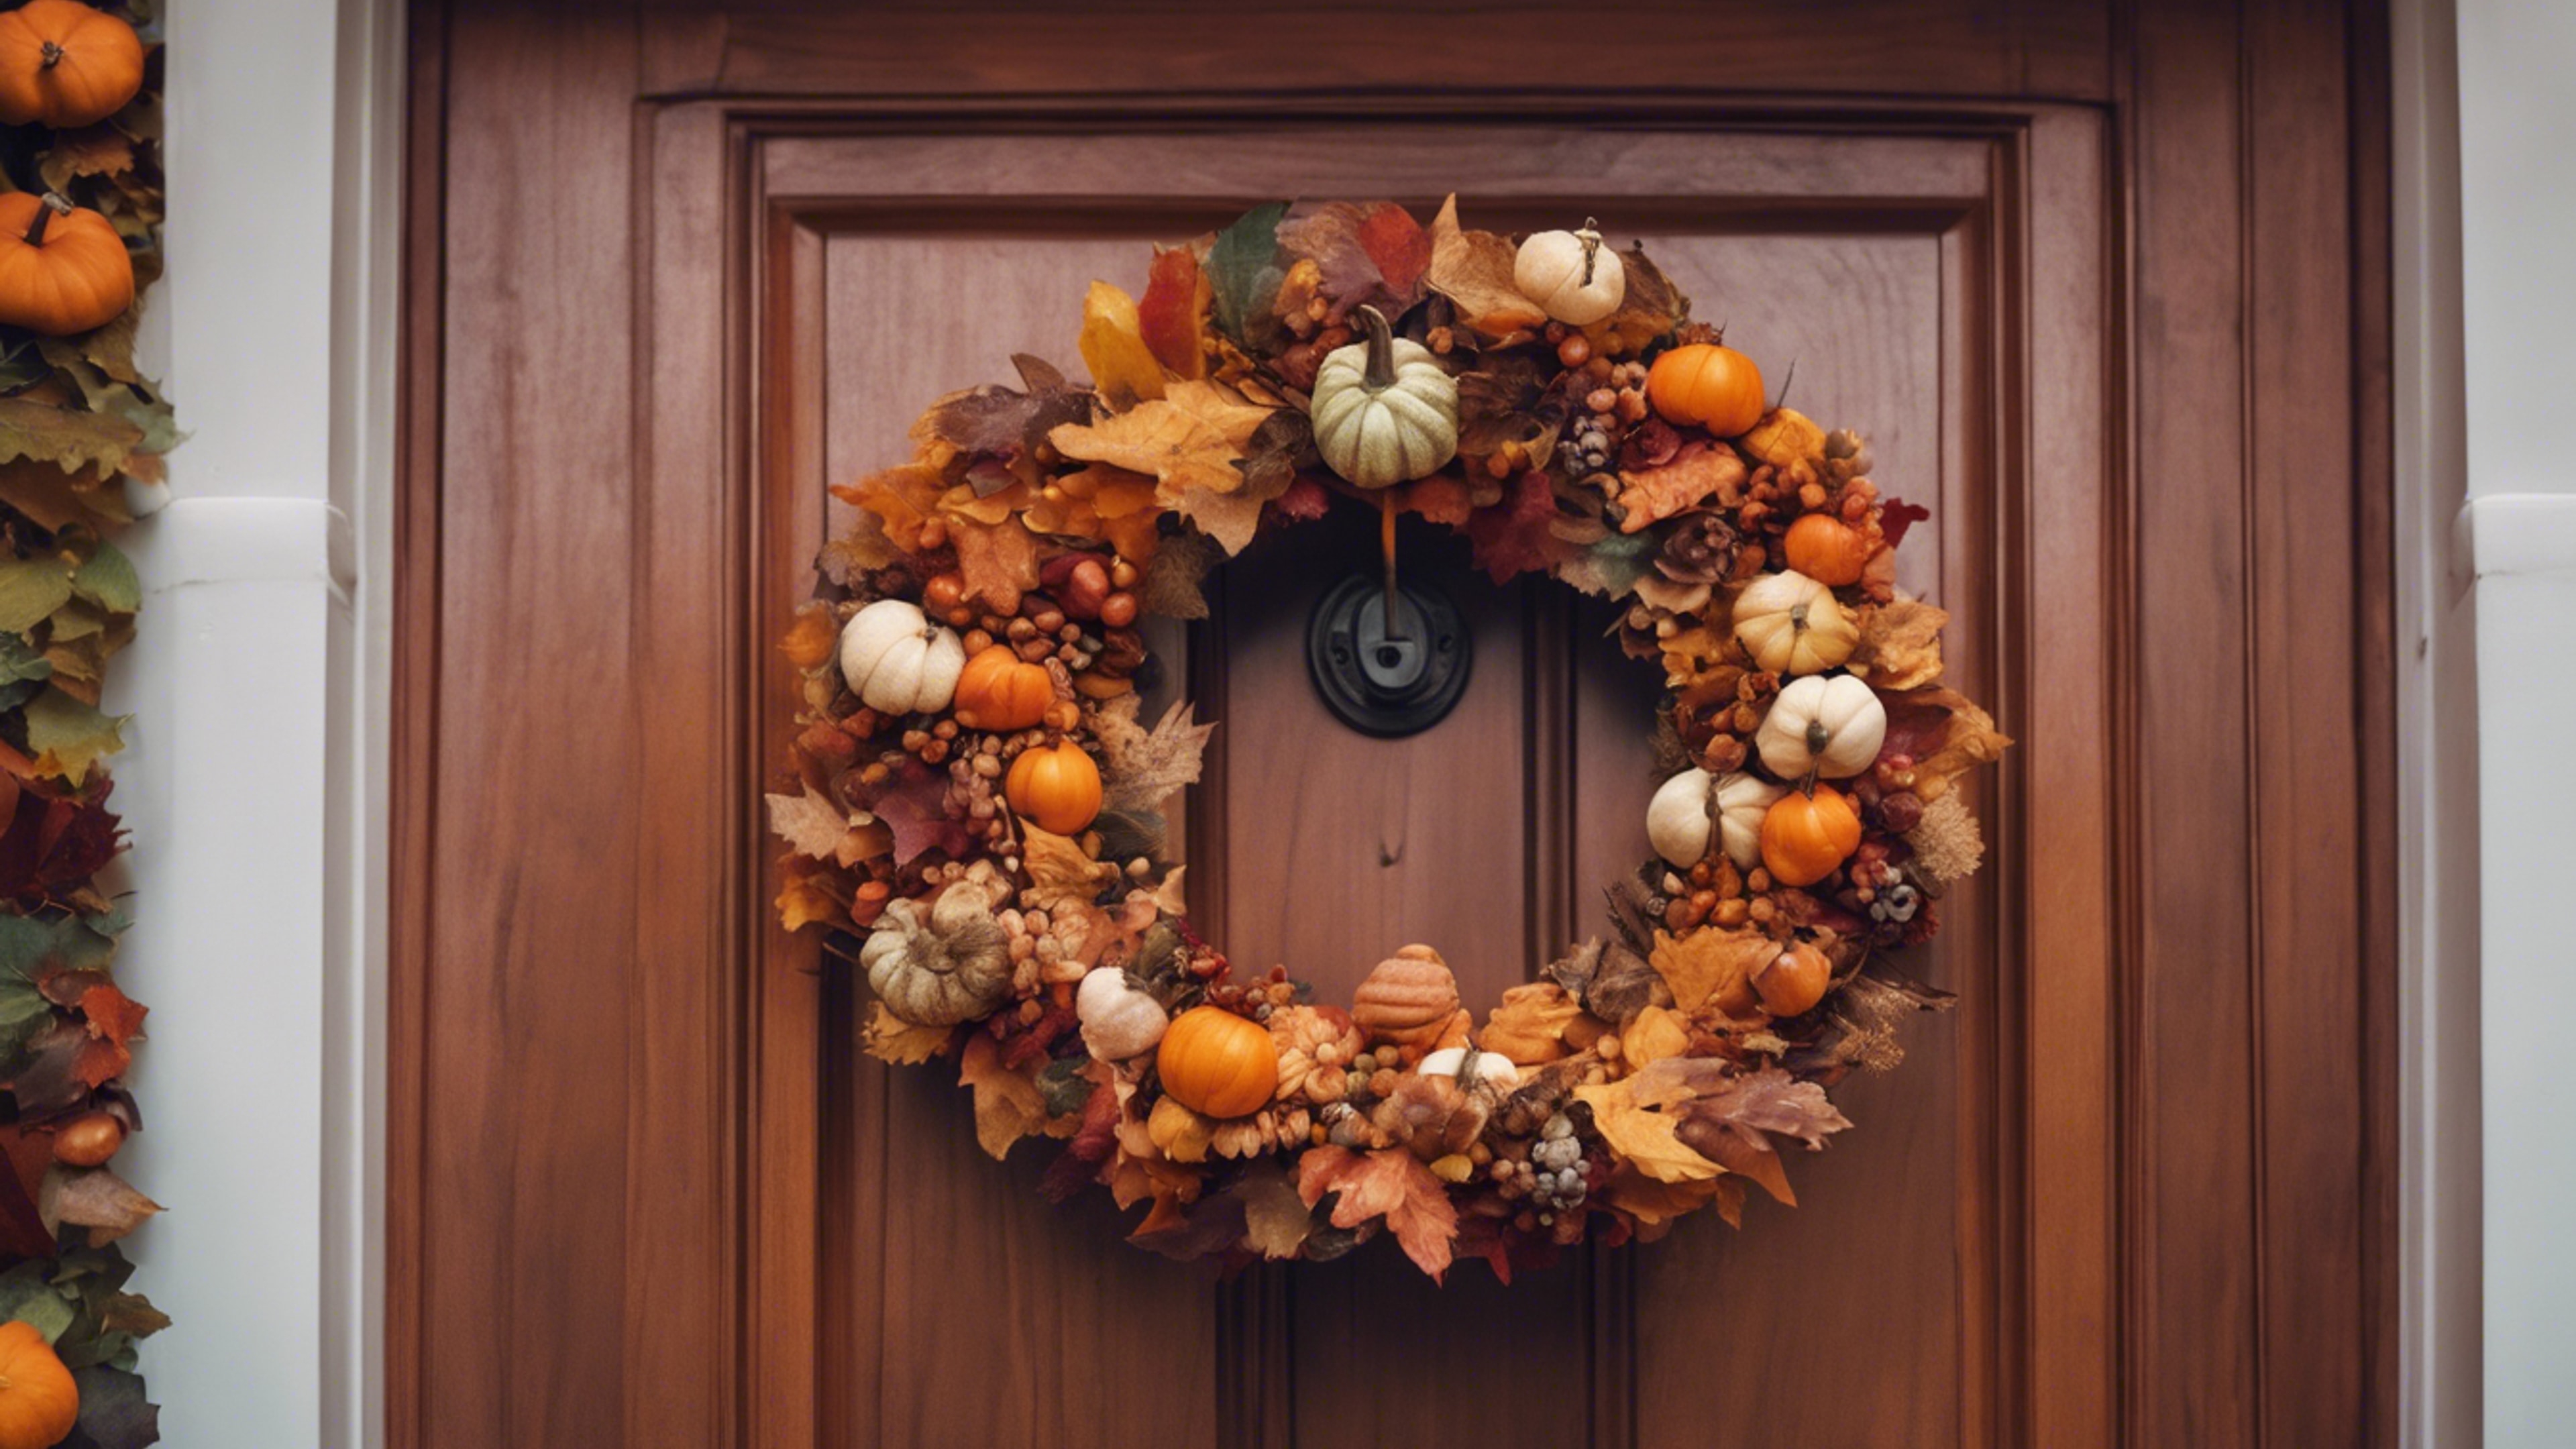 A festive autumn wreath made of colorful fall leaves and miniature pumpkins hanging elegantly on a mahogany door, signaling the start of the Thanksgiving holiday. Tapeta[f1a39b05ecd5476686a3]